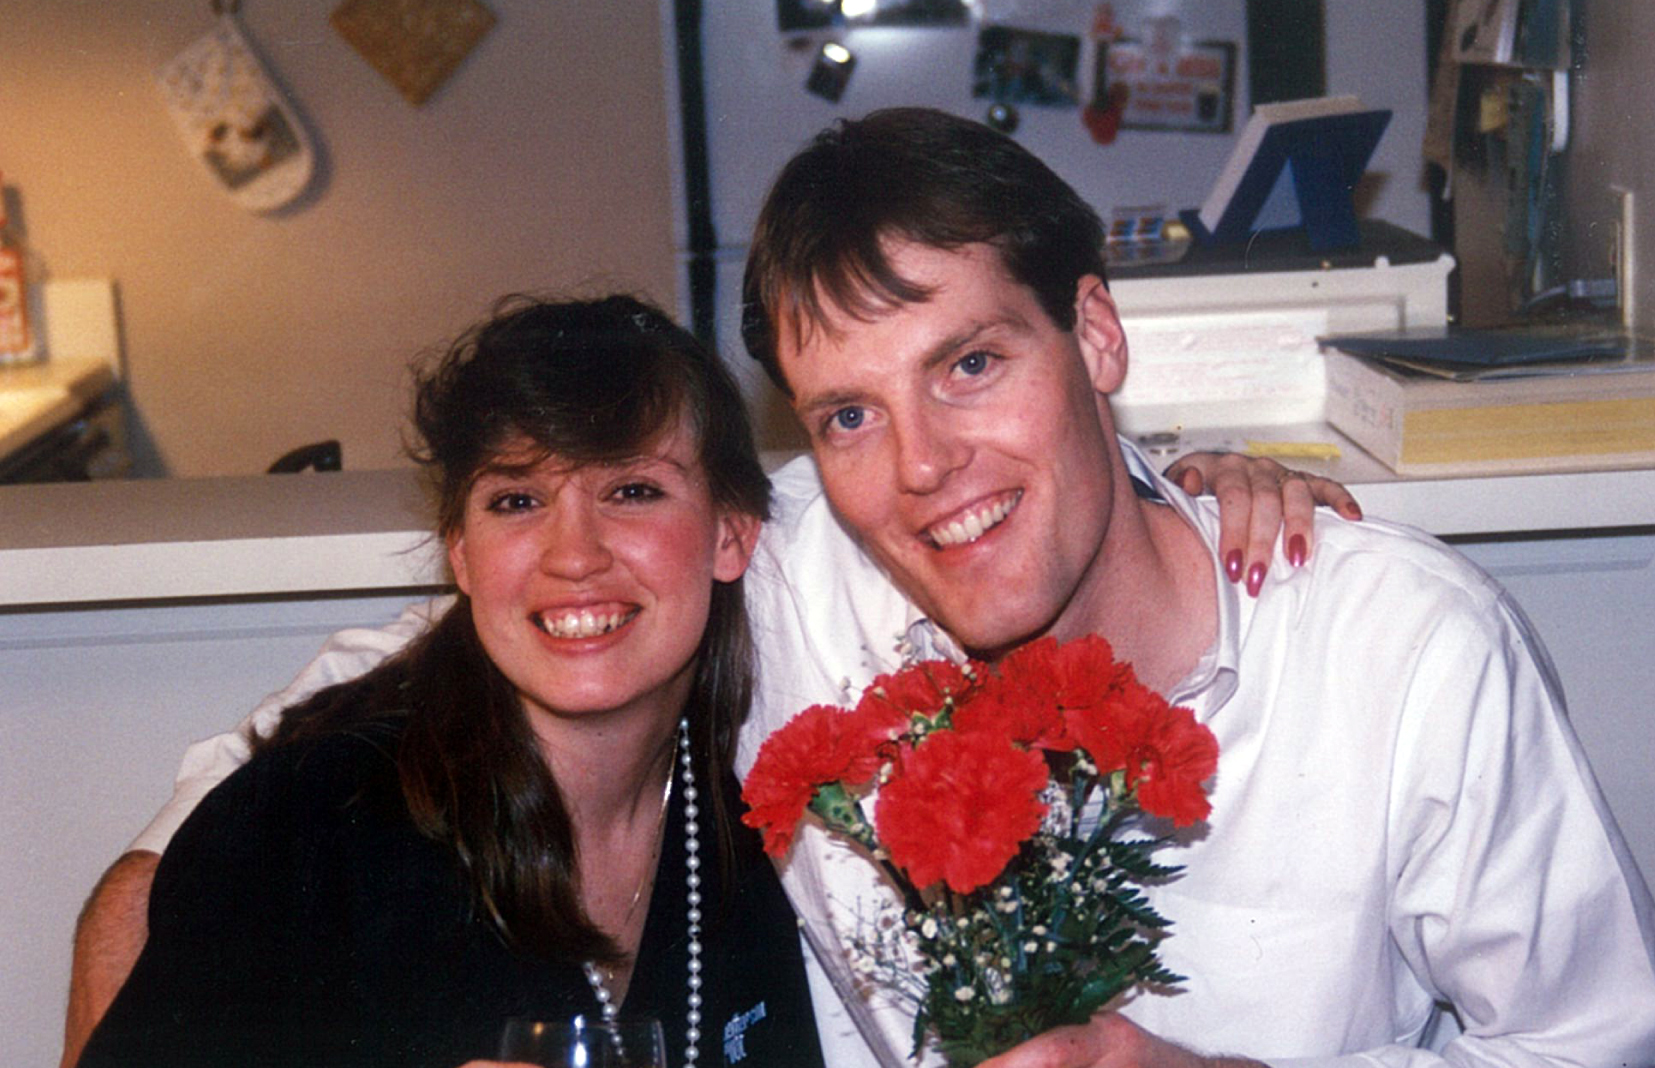 The dating years: Chris and Jacque Young